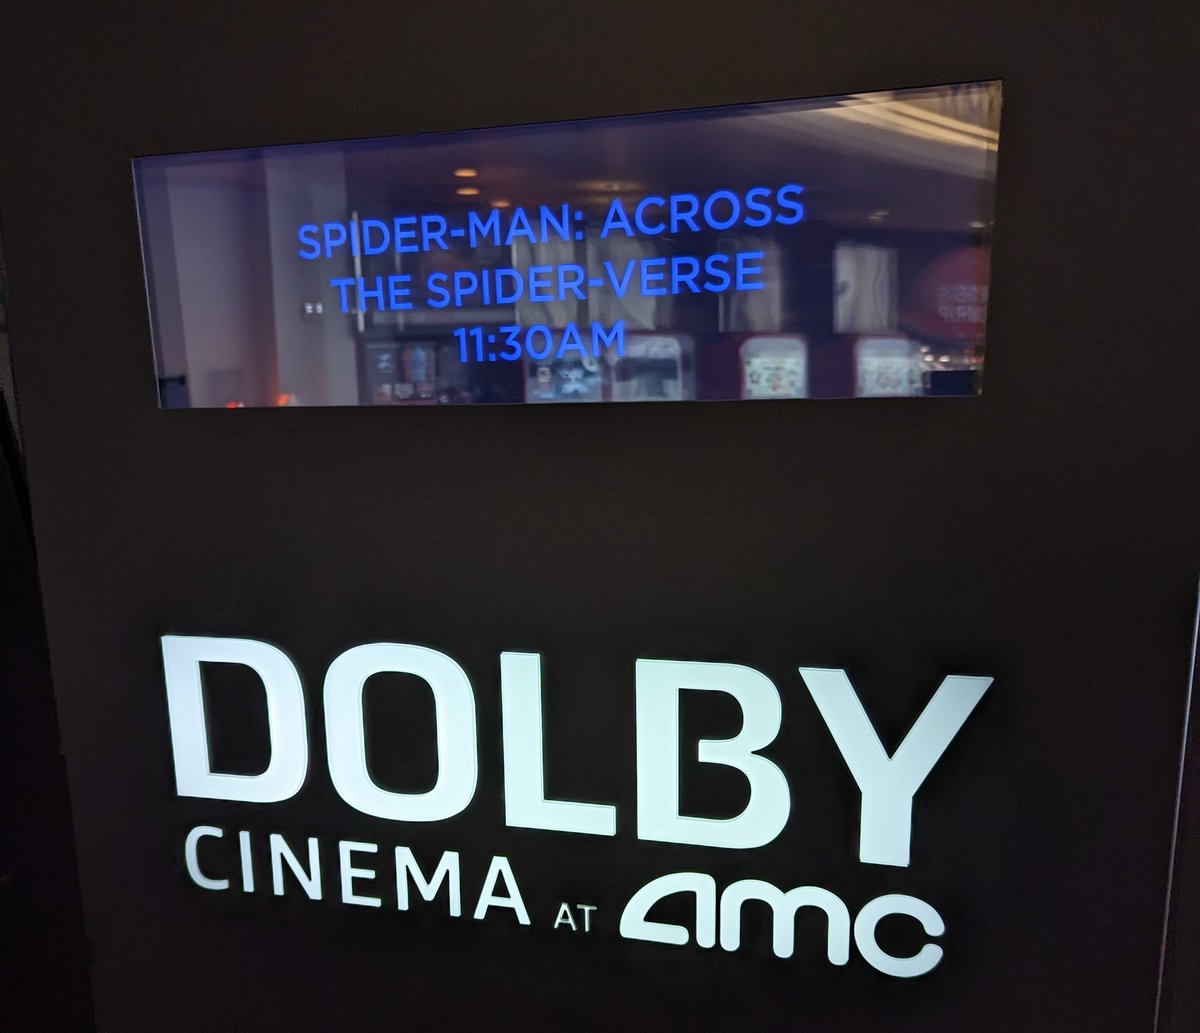 Just watched “Spider-Man: Across the Spider-Verse” in #DolbyCinema. A decent followup to original with more Spider-Madness. 4/5 holes. #SpiderManAcrossTheSpiderVerse #Spiderman #MilesMorales #SpiderVerse #SpiderVerse2 #Marvel #PeterParker #AMC #Sony